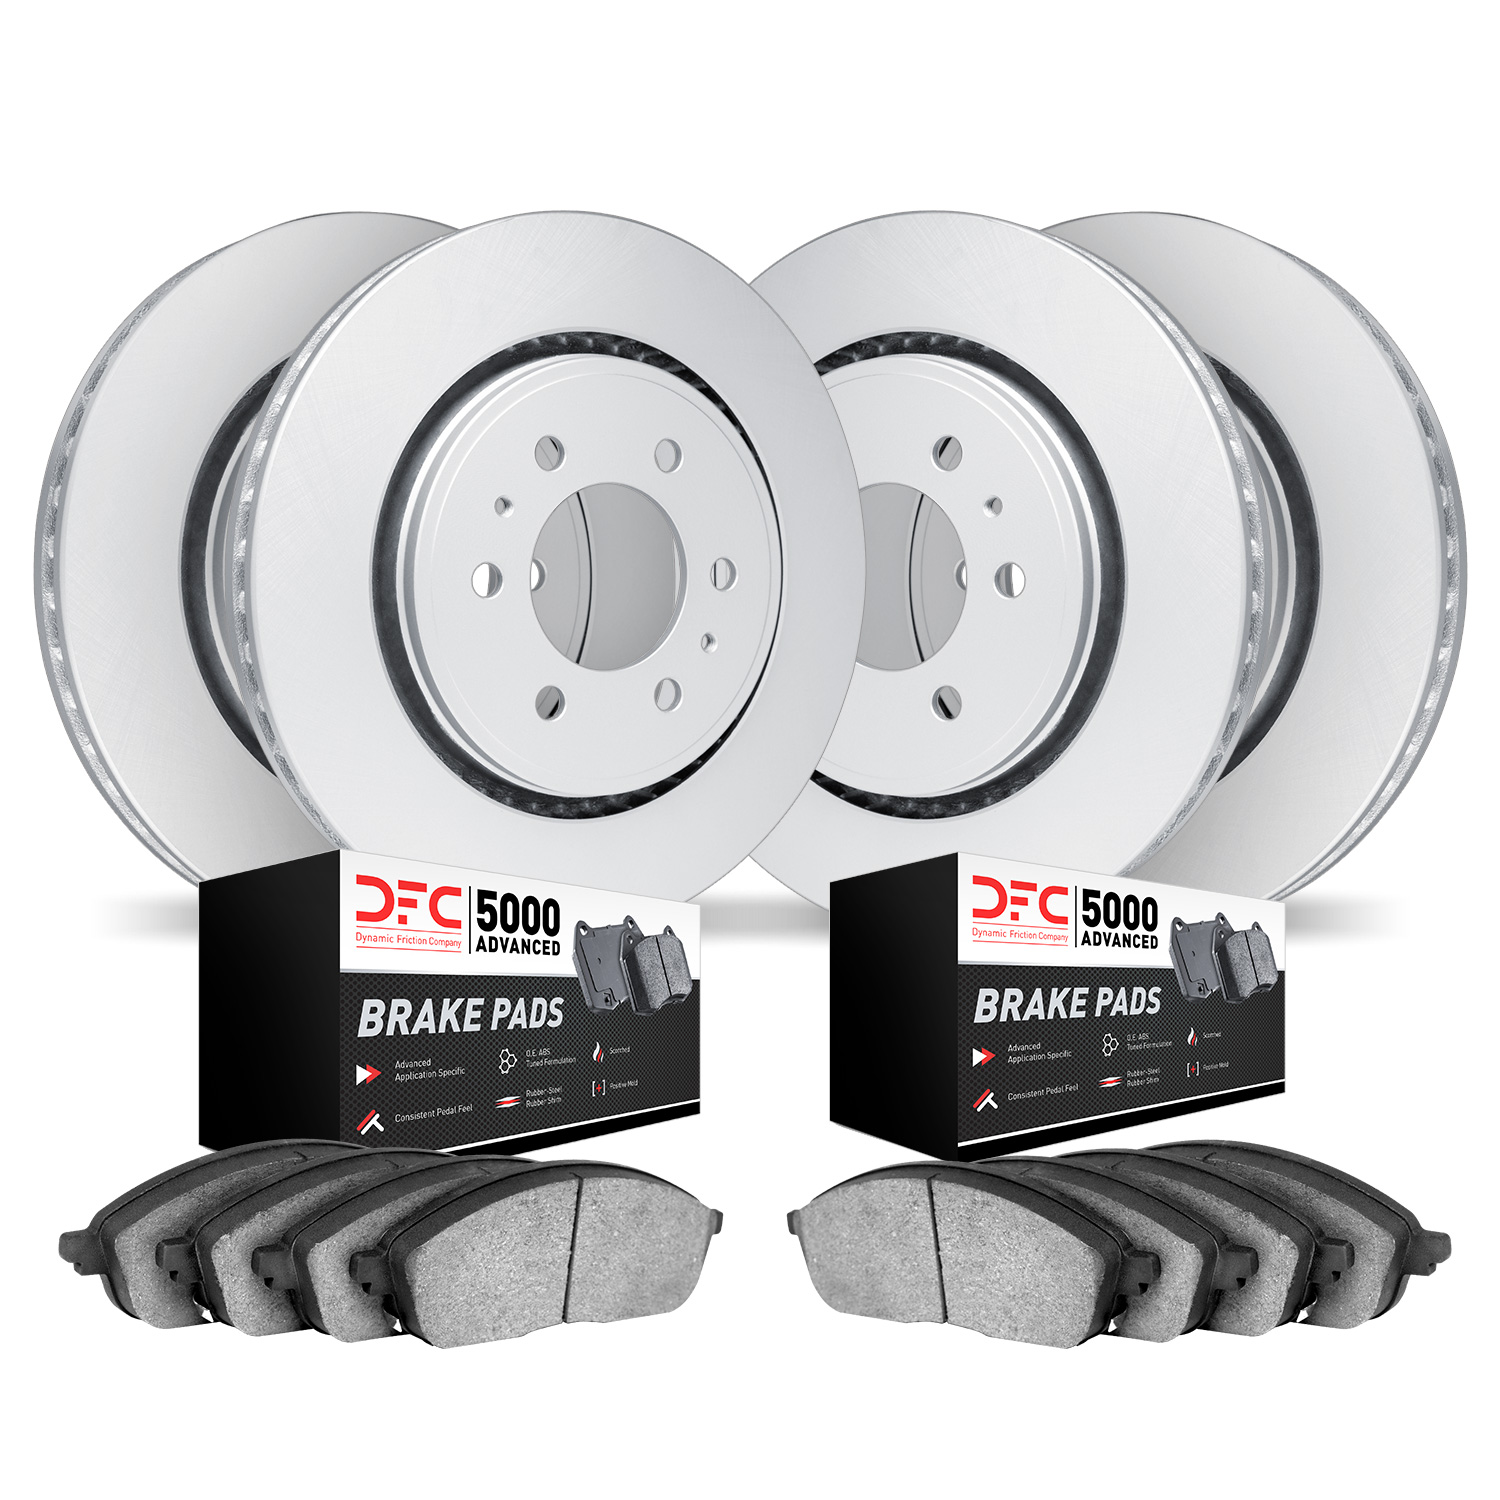 4504-48027 Geospec Brake Rotors w/5000 Advanced Brake Pads Kit, 2006-2009 GM, Position: Front and Rear